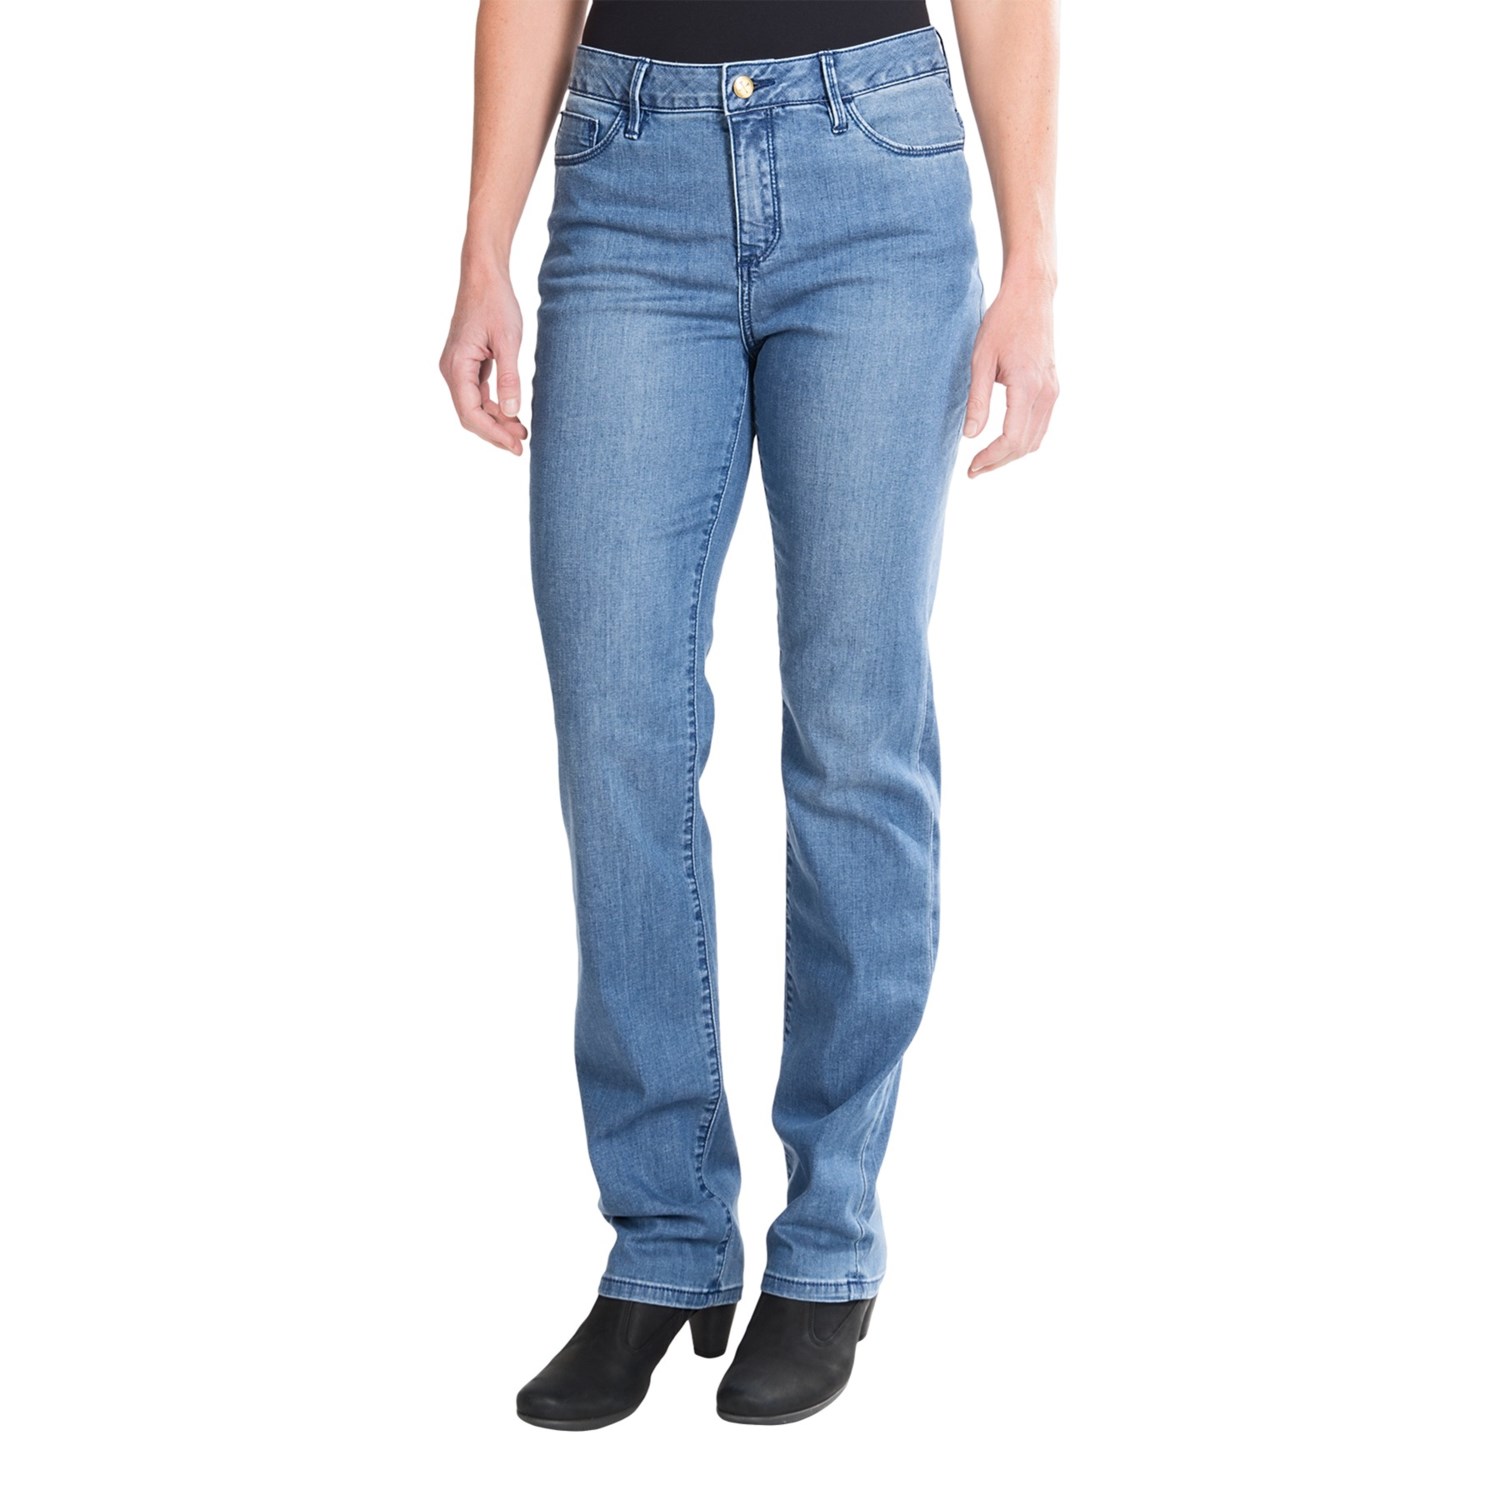 Christopher Blue Madison Straight-Leg Jeans (For Women) - Save 67%